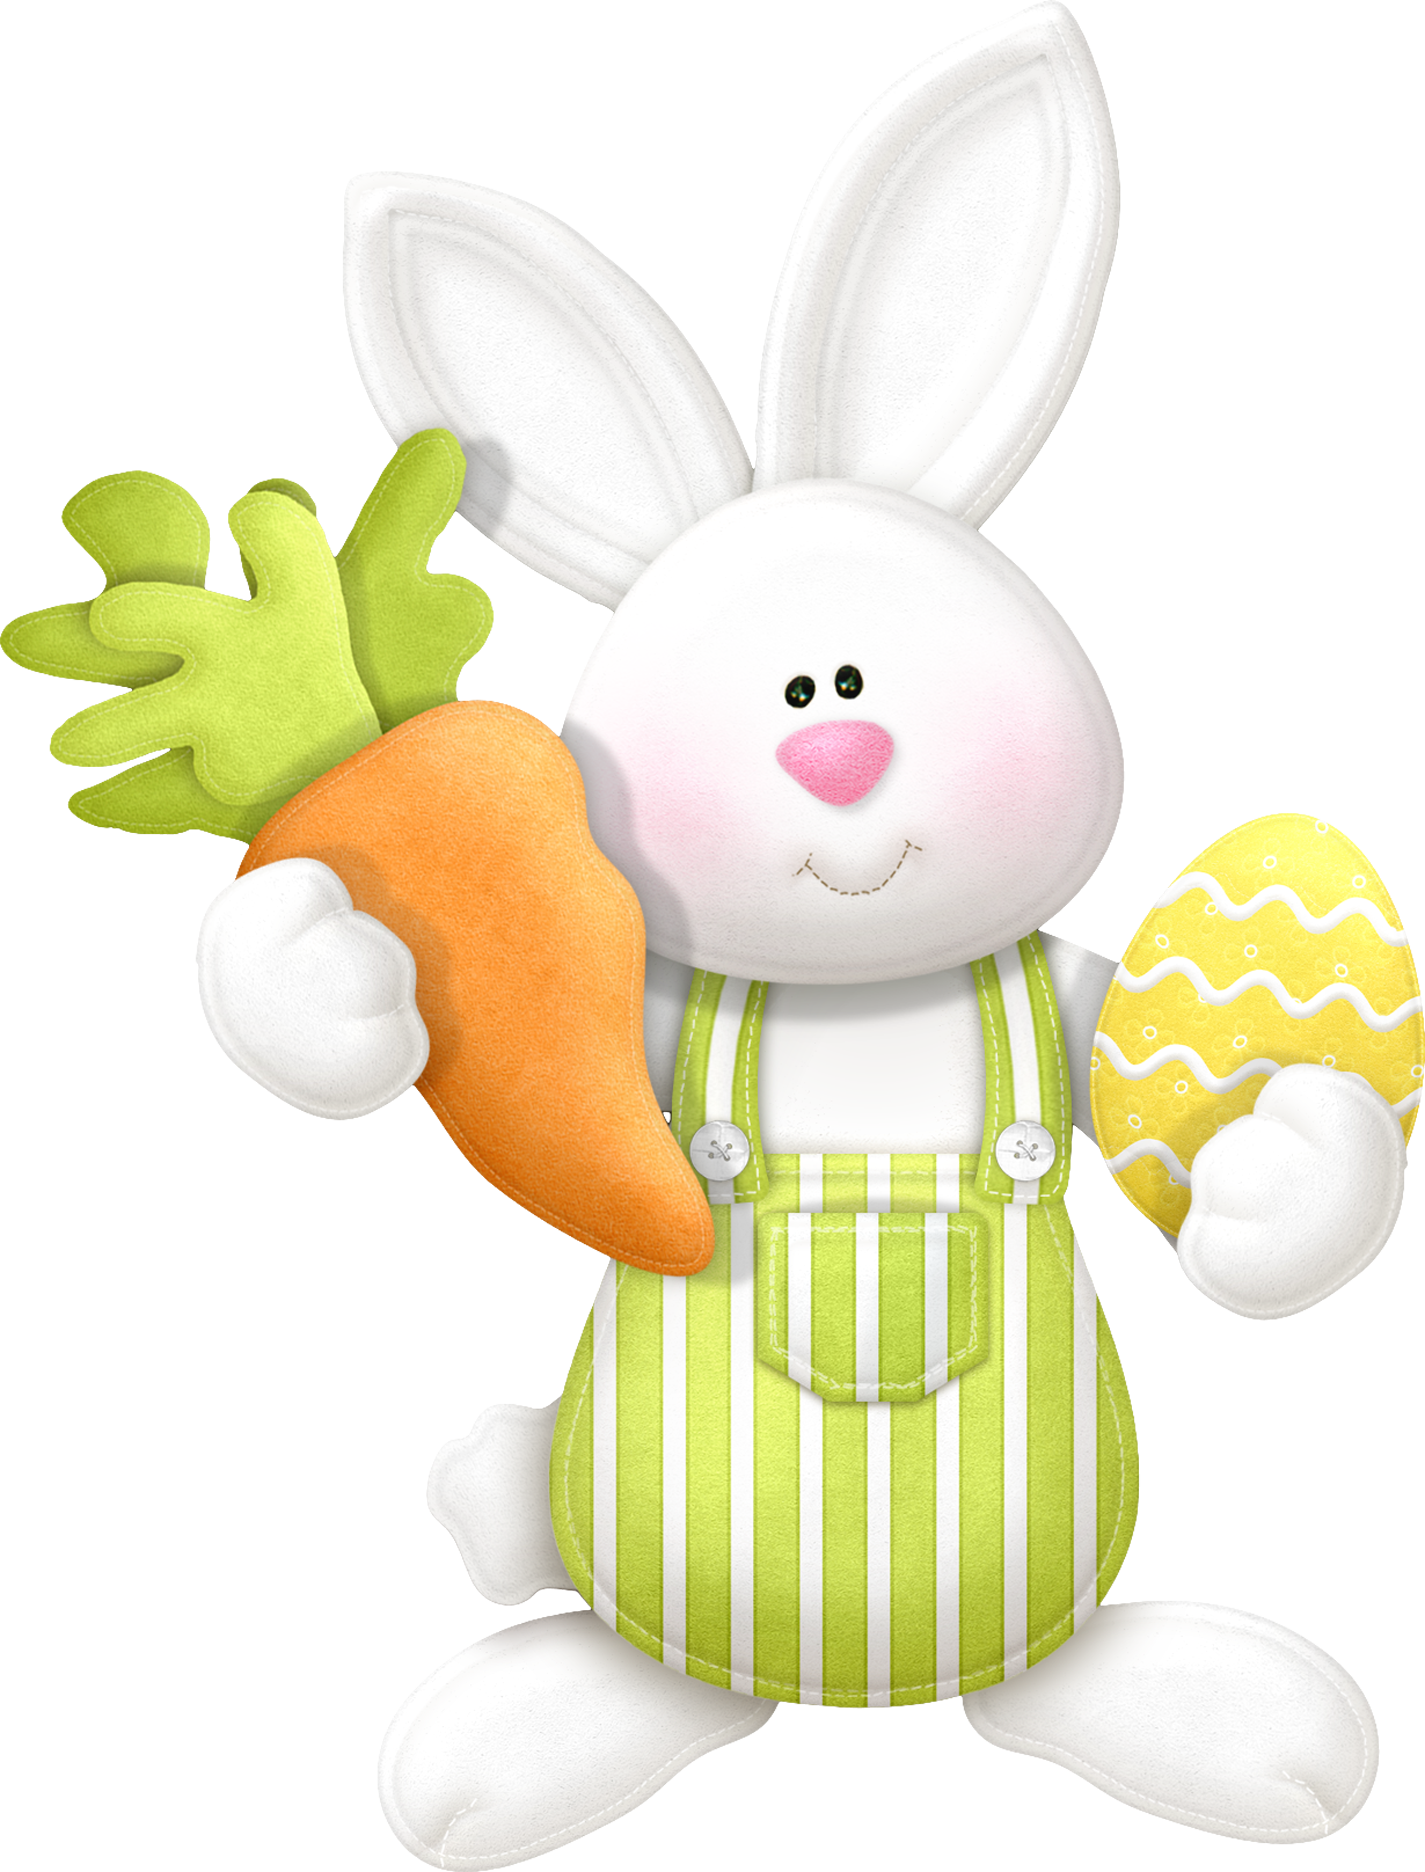 A White Bunny Holding A Carrot And An Egg